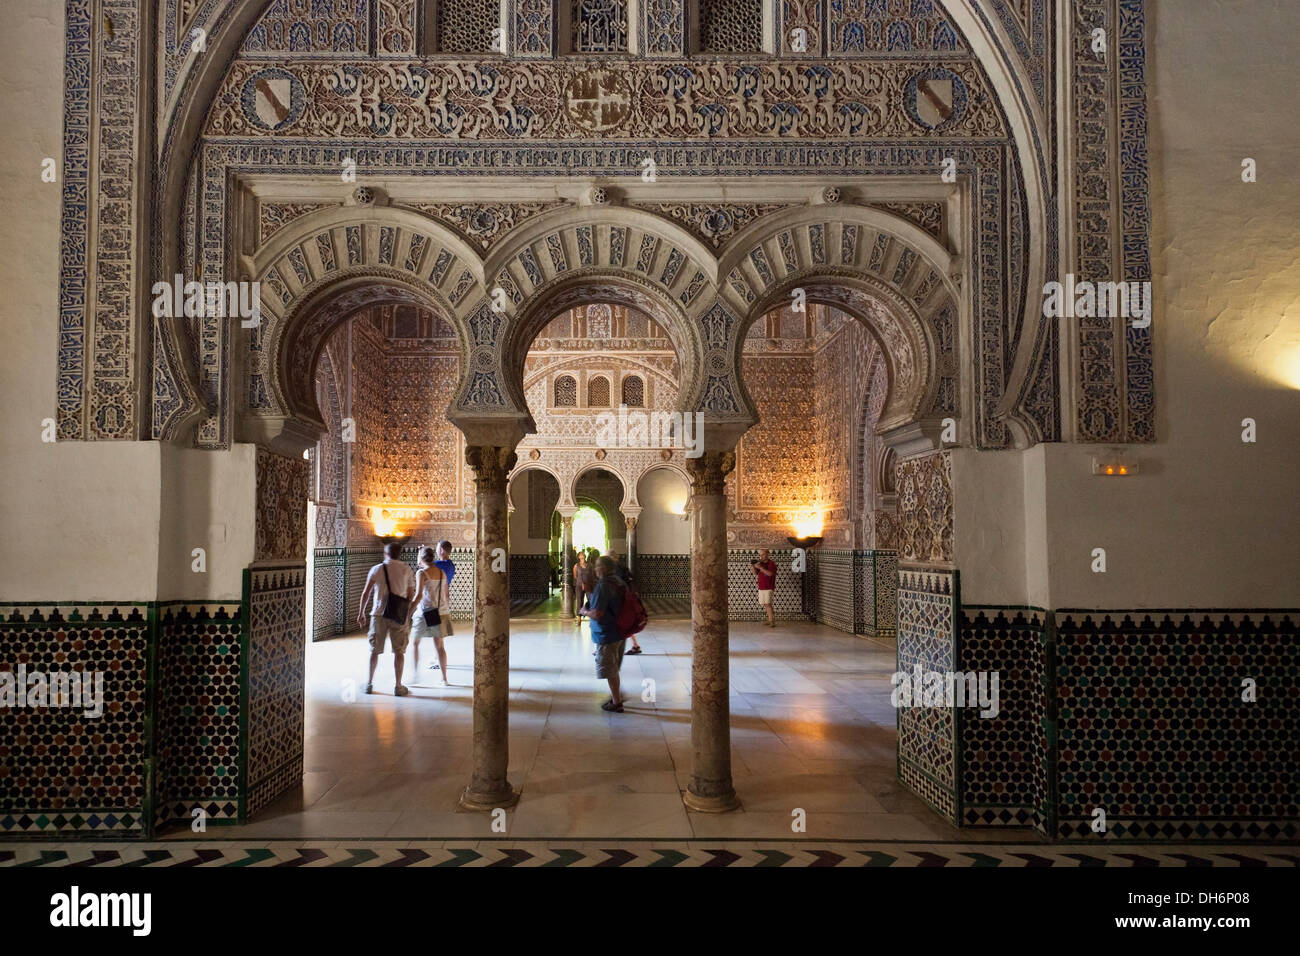 Arched passage at Real Alkazar of Seville, Spain Stock Photo